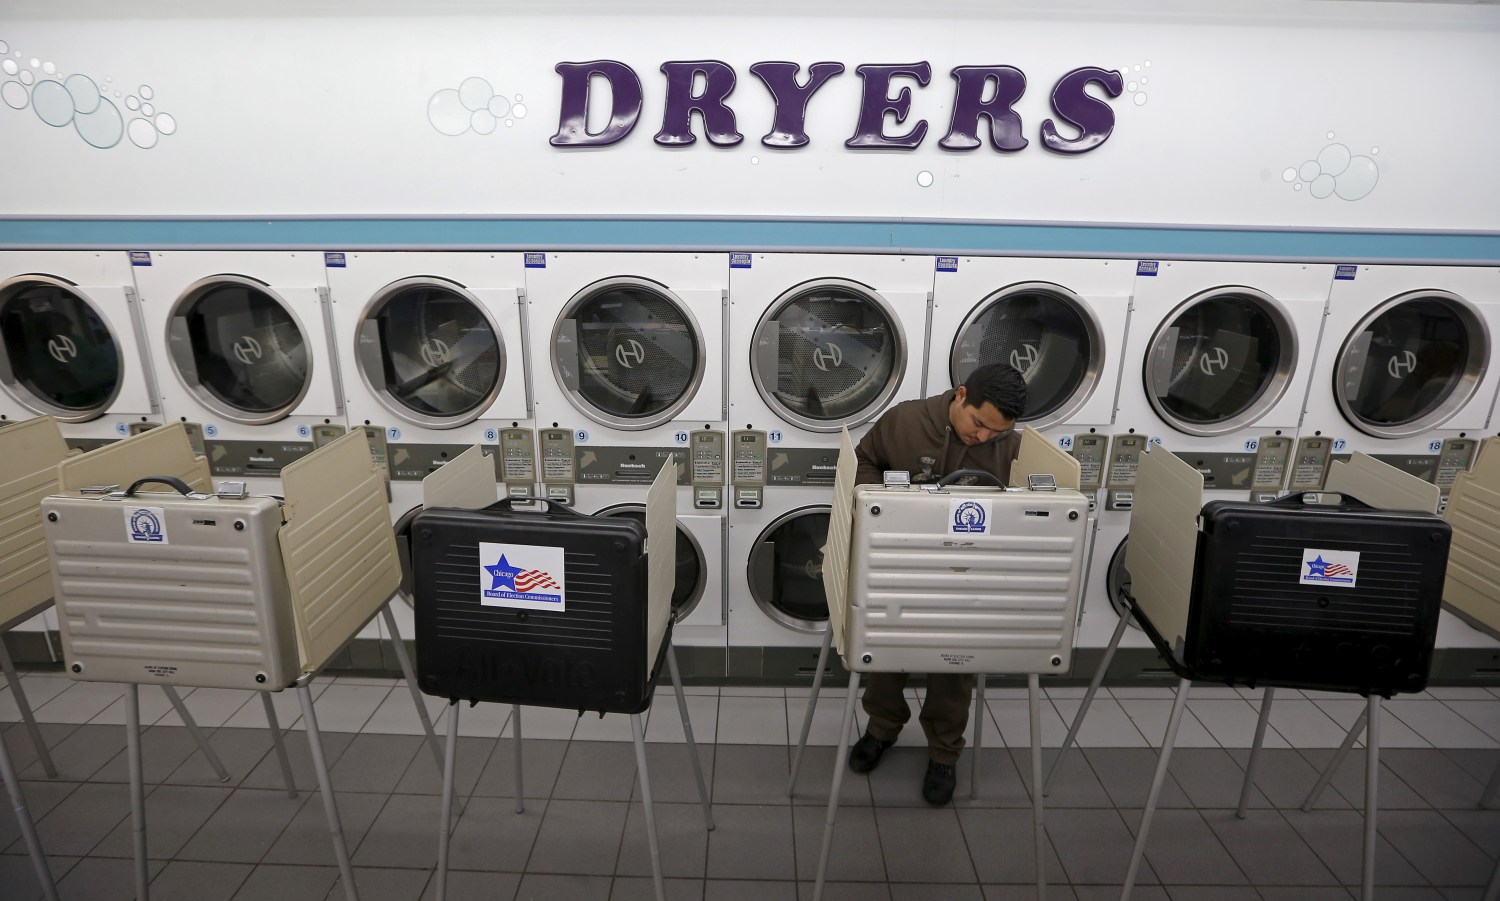 A voter casts a ballot at Su Nueva laundromat during voting in Illinois' U.S. presidential primary election in Chicago